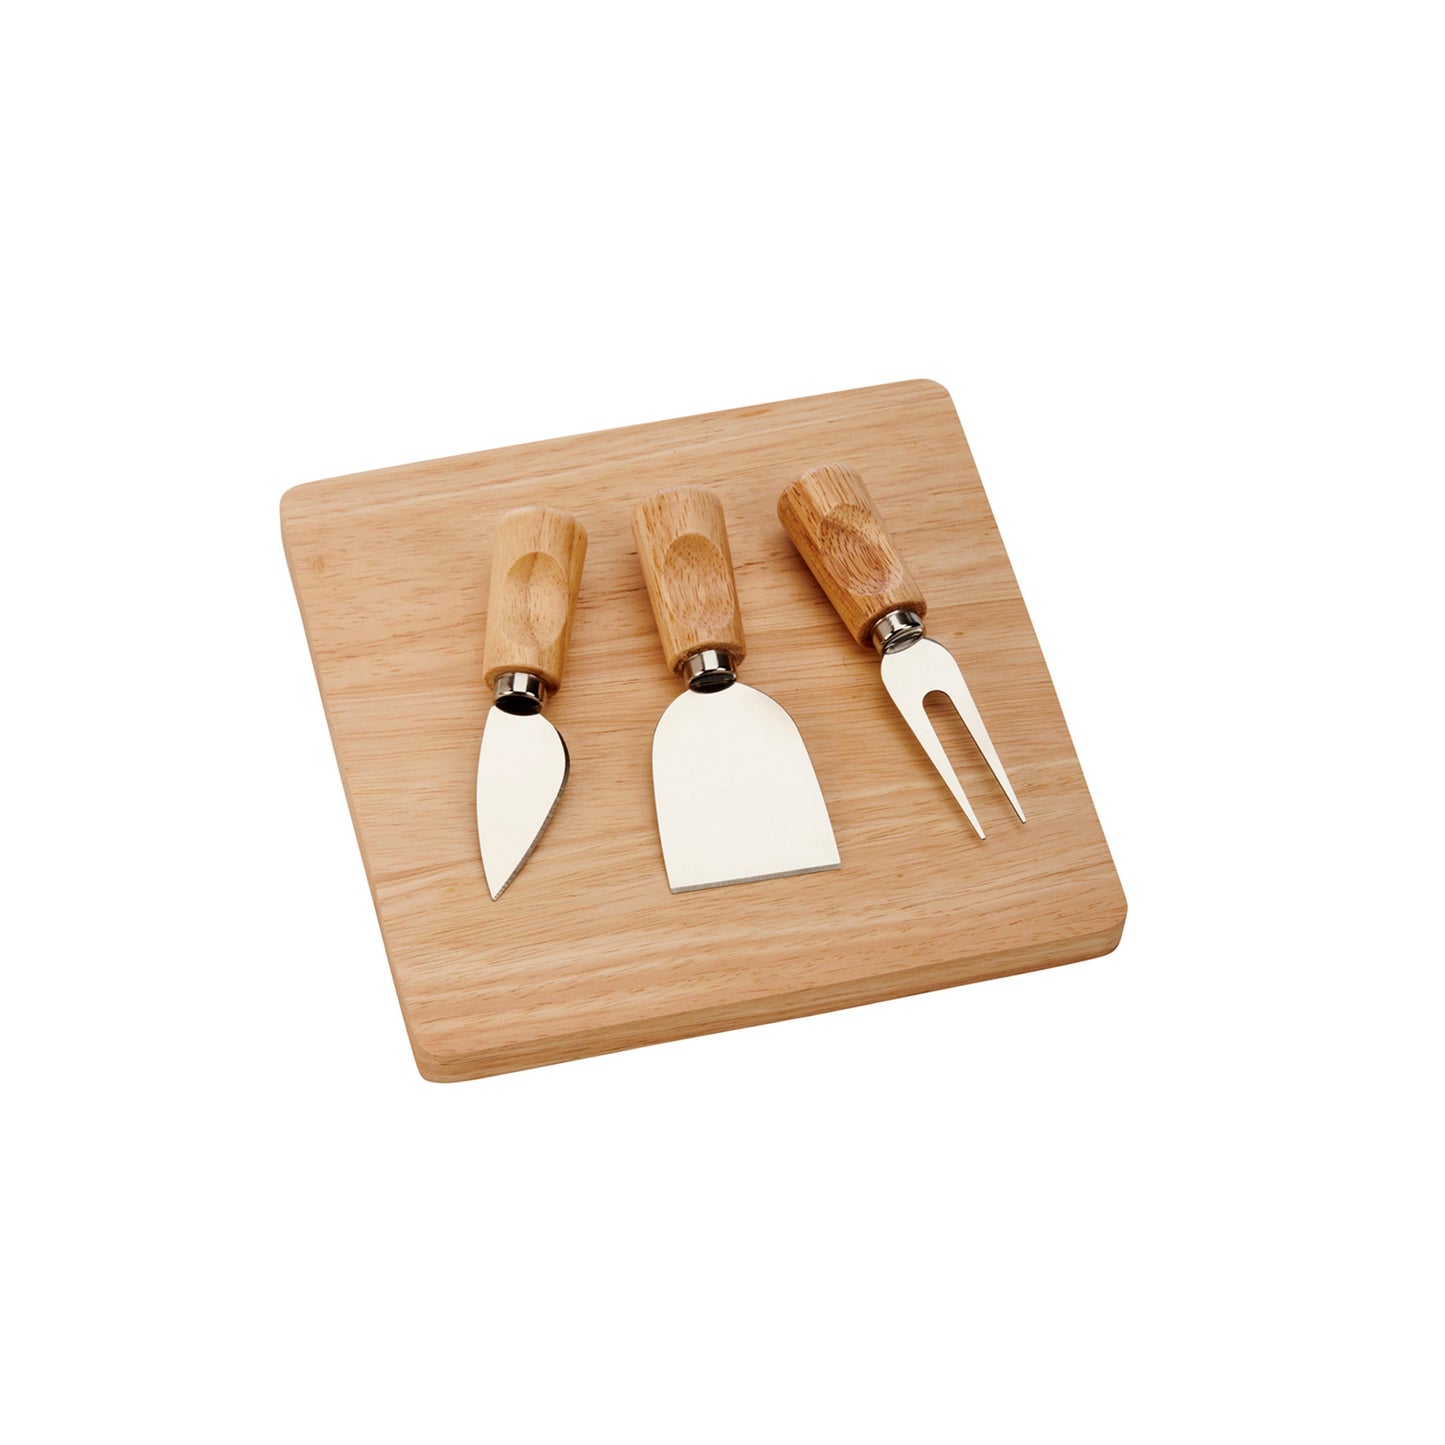 Rubberwood Cheese Cutting Board Set with 3 Tools by Creative Gifts